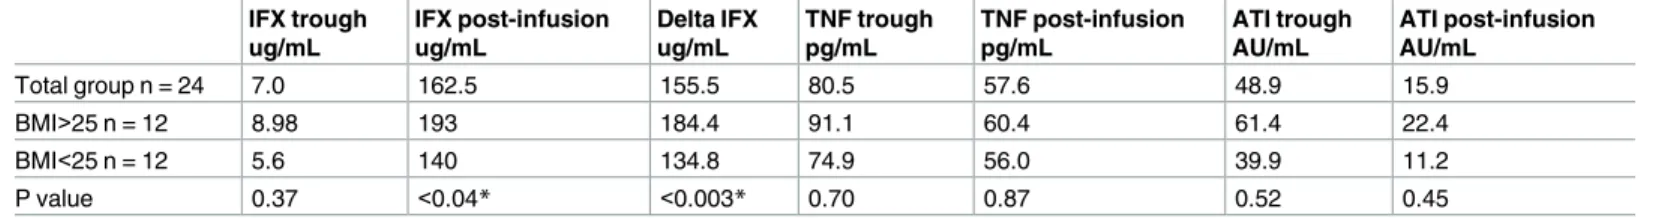 Table 3. Serum levels of each factor based on use of immunosuppressant. IFX trough ug/mL IFX post-infusion ug/mL Delta IFX